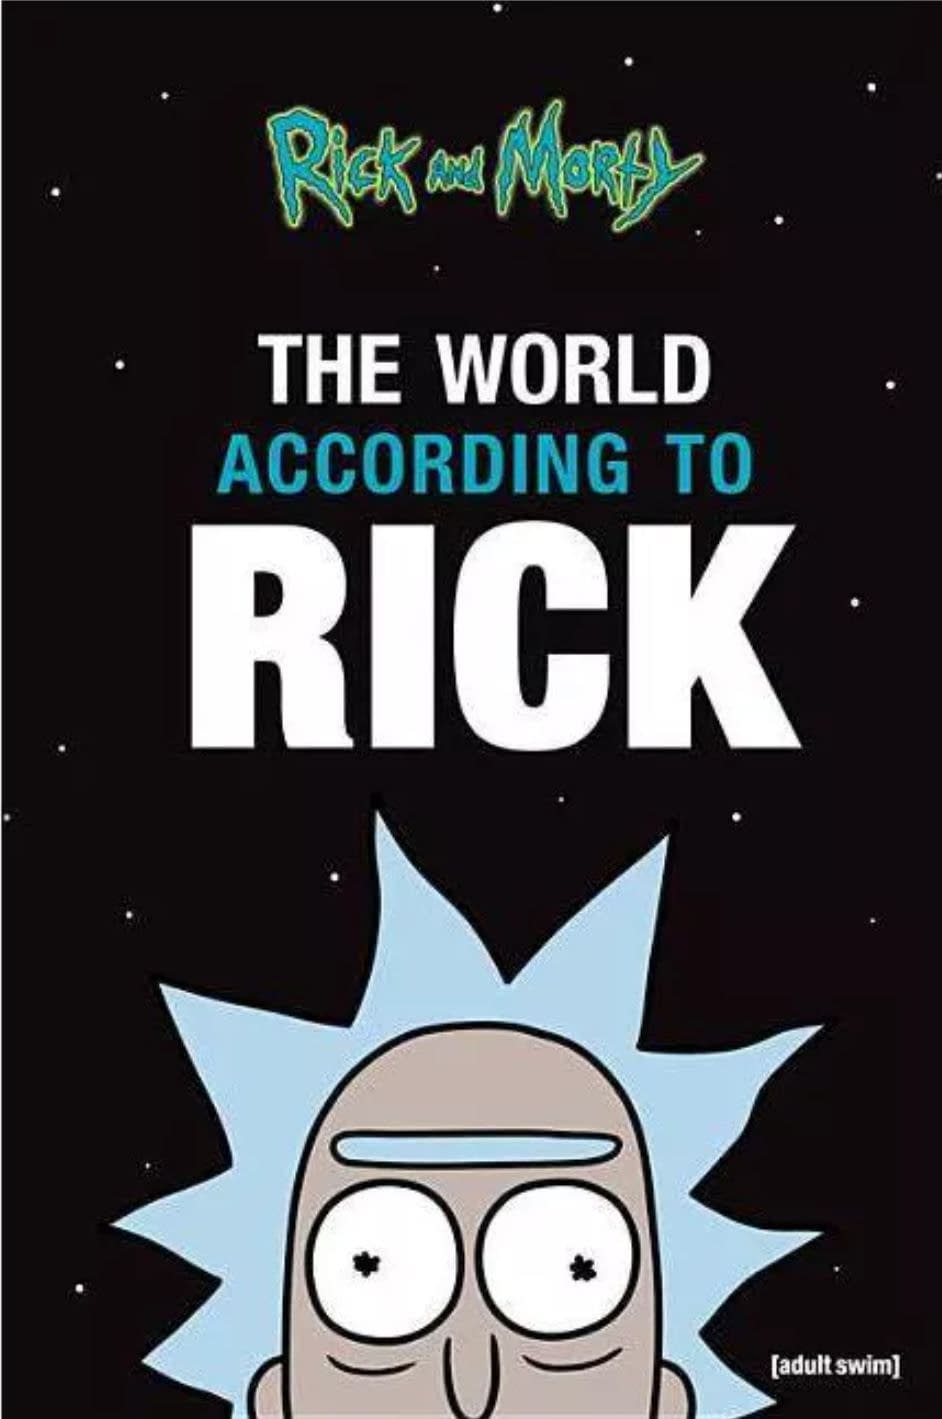 Oh geez Rick, not another gift guide!